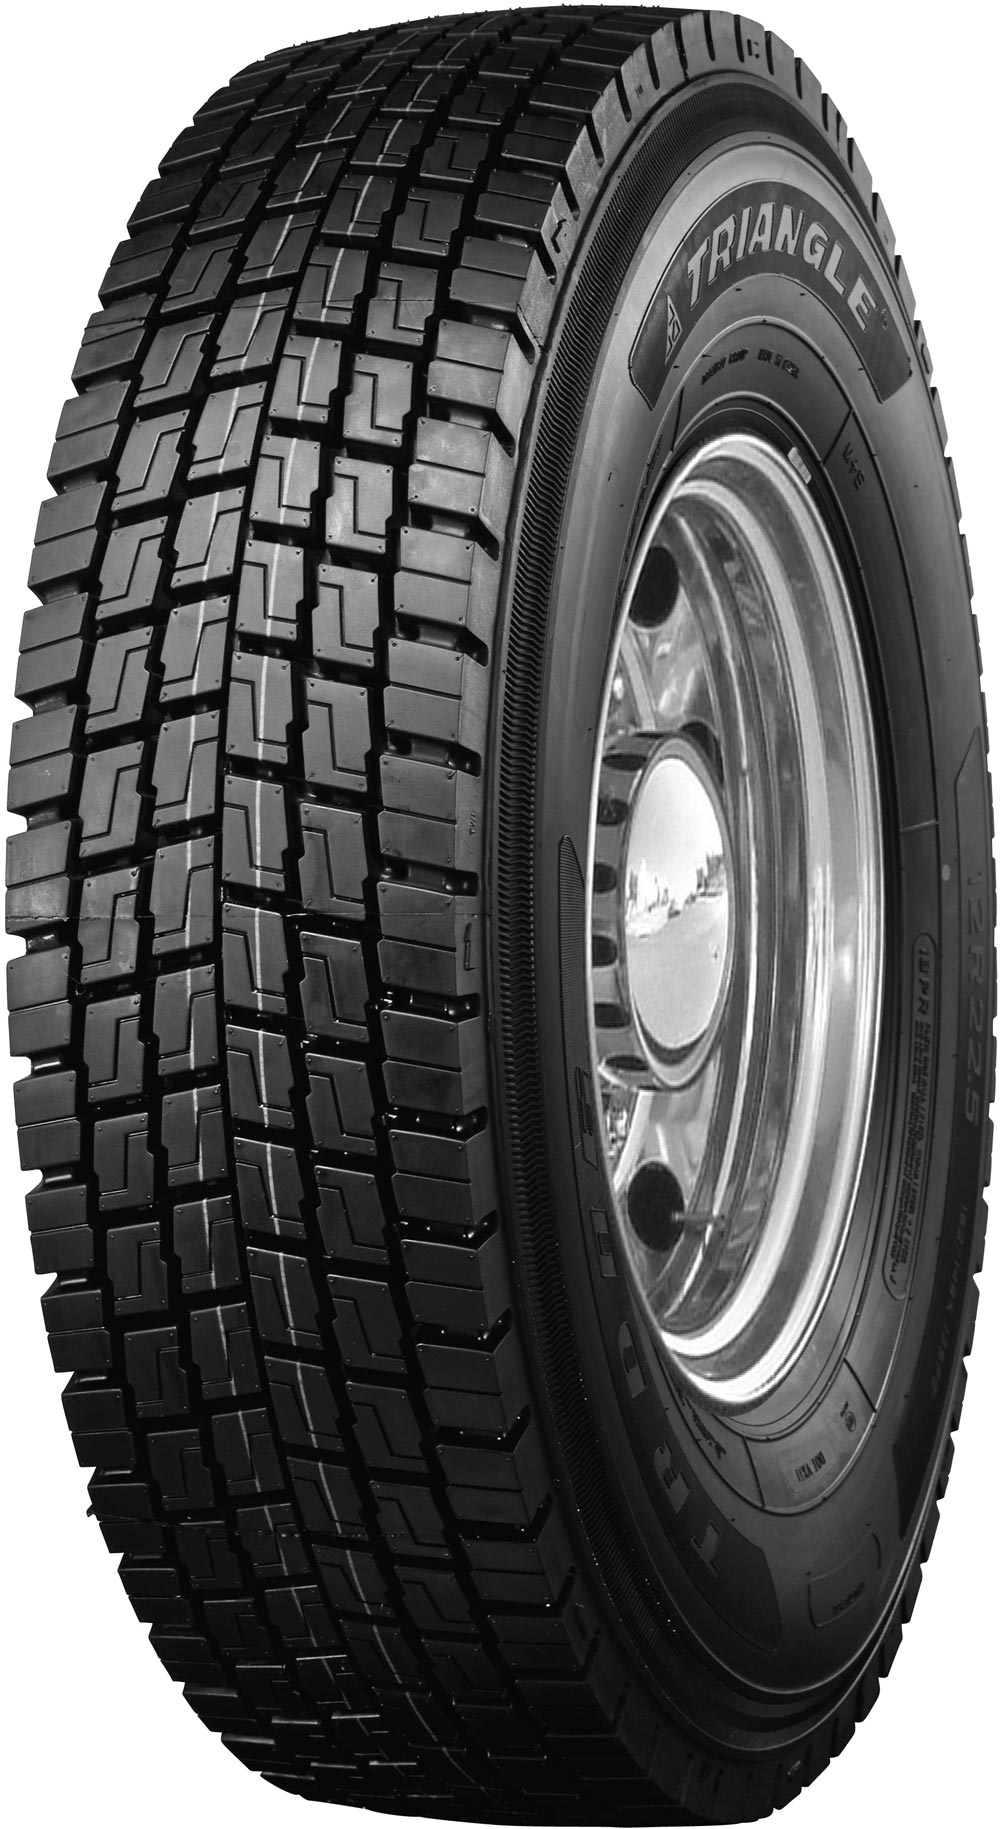 product_type-heavy_tires Triangle TRD06 16PR 315/70 R22.5 152P